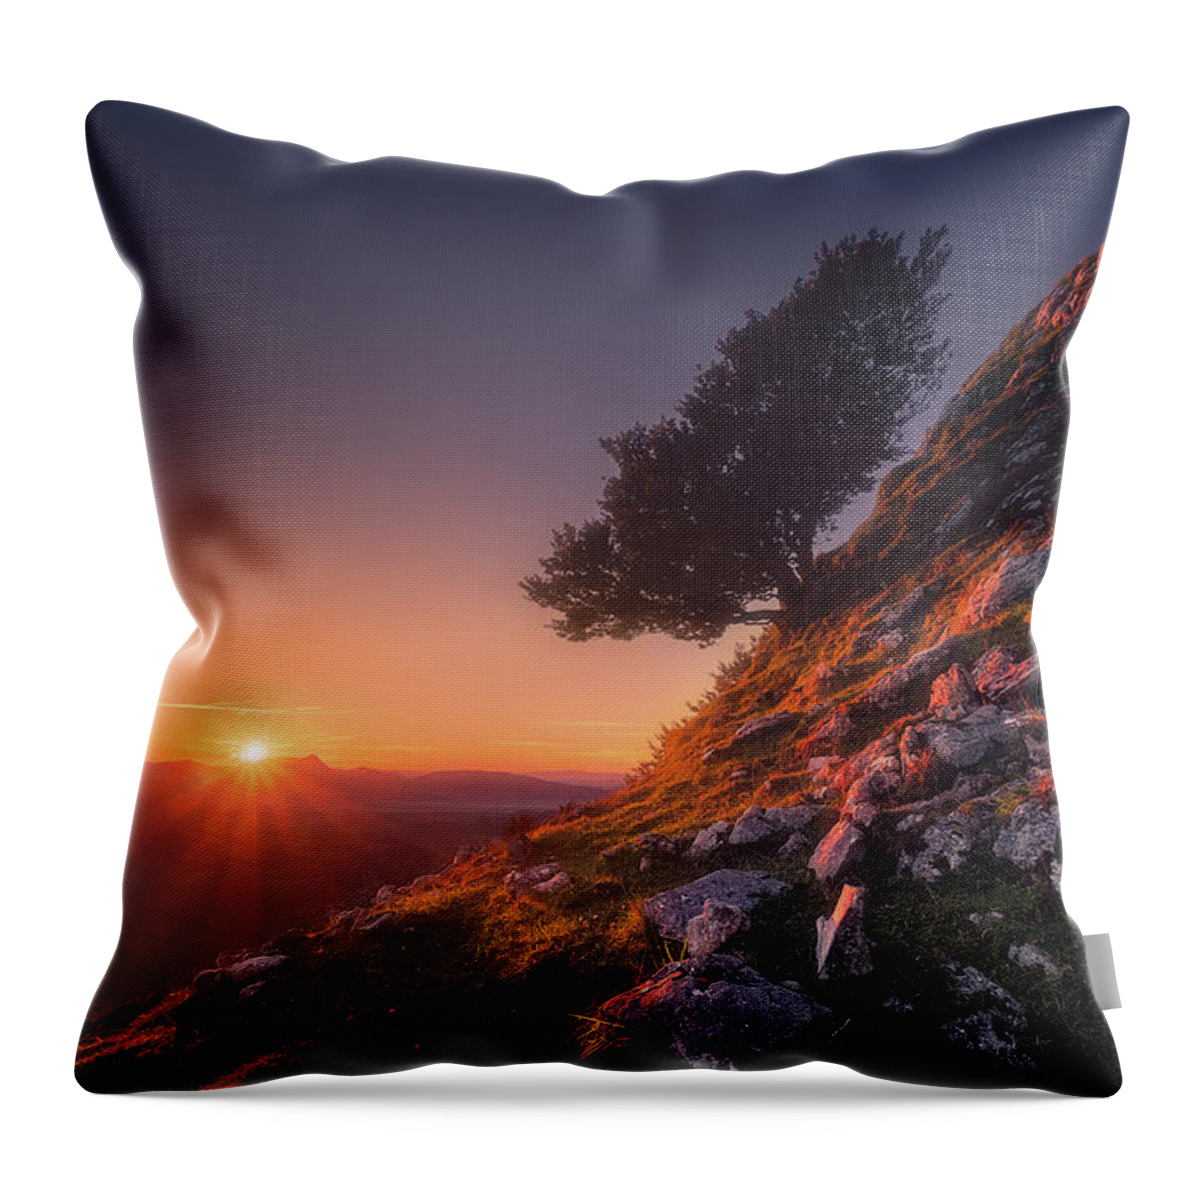 Lonely Throw Pillow featuring the photograph The sentinel by Mikel Martinez de Osaba